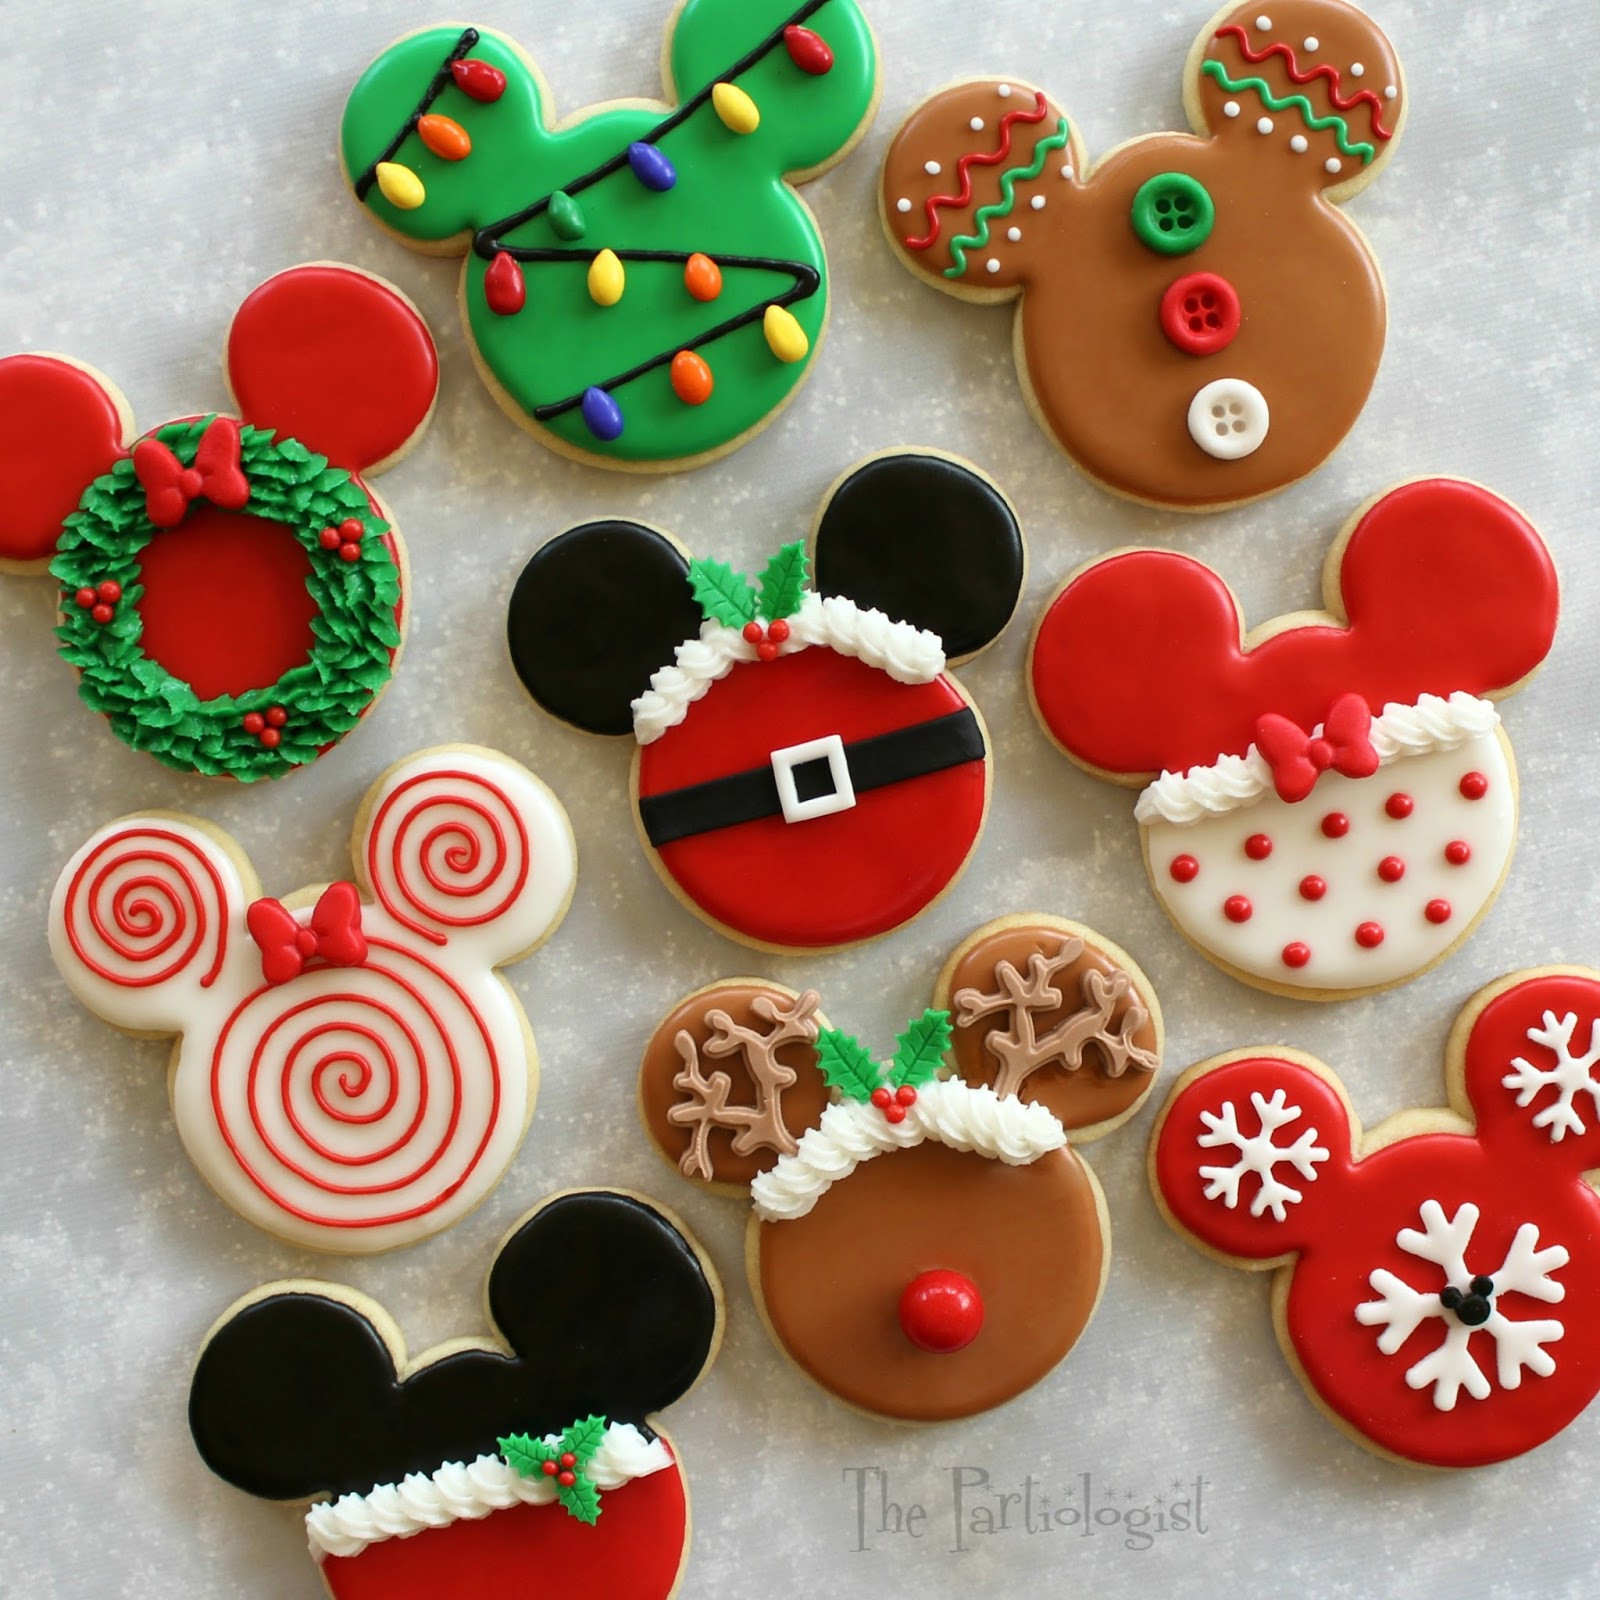 Christmas Baking Pinterest
 The Partiologist Disney Themed Christmas Cookies